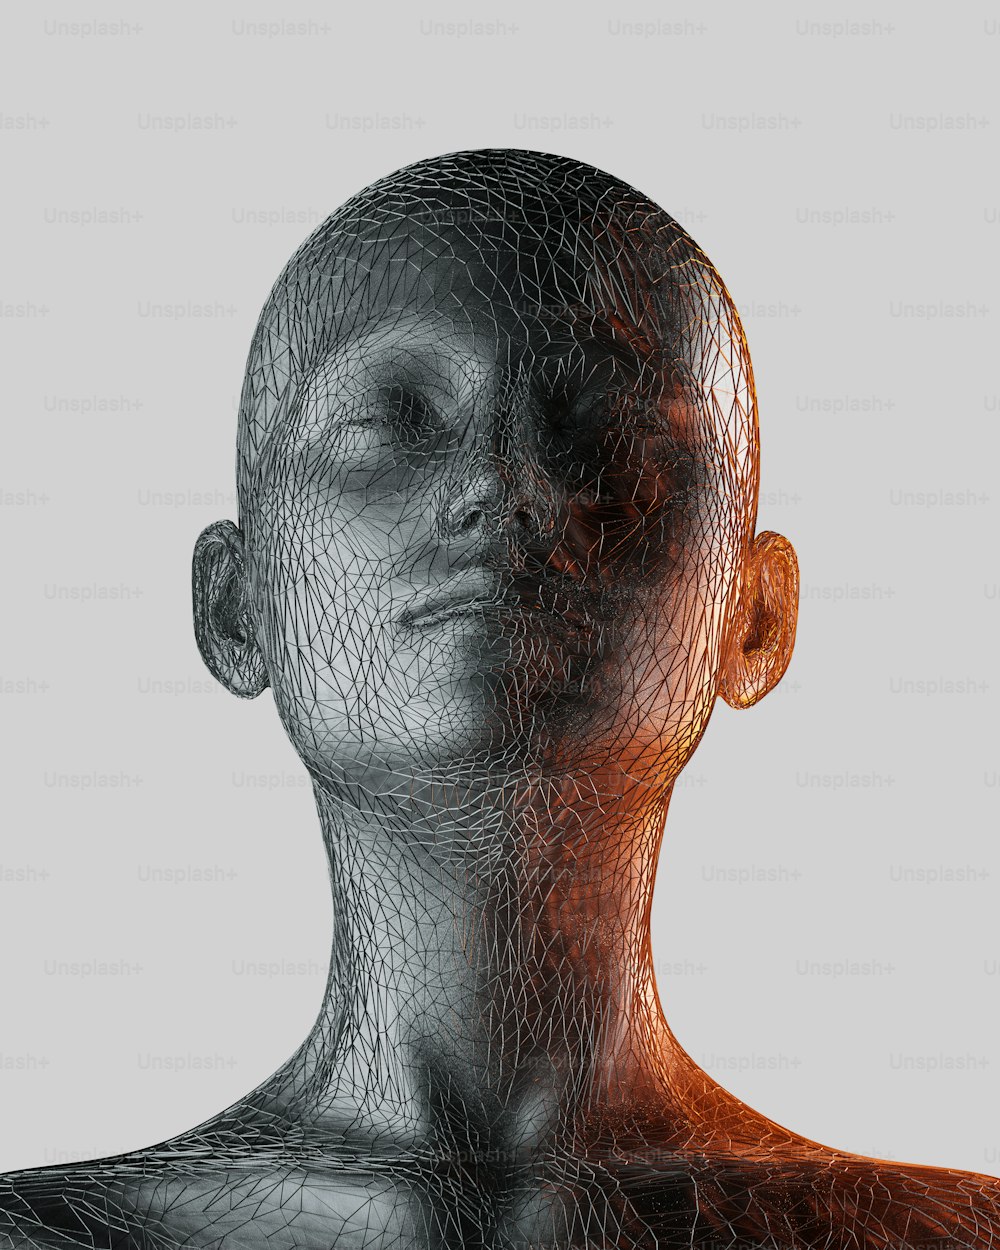 a 3d image of a man's head and neck